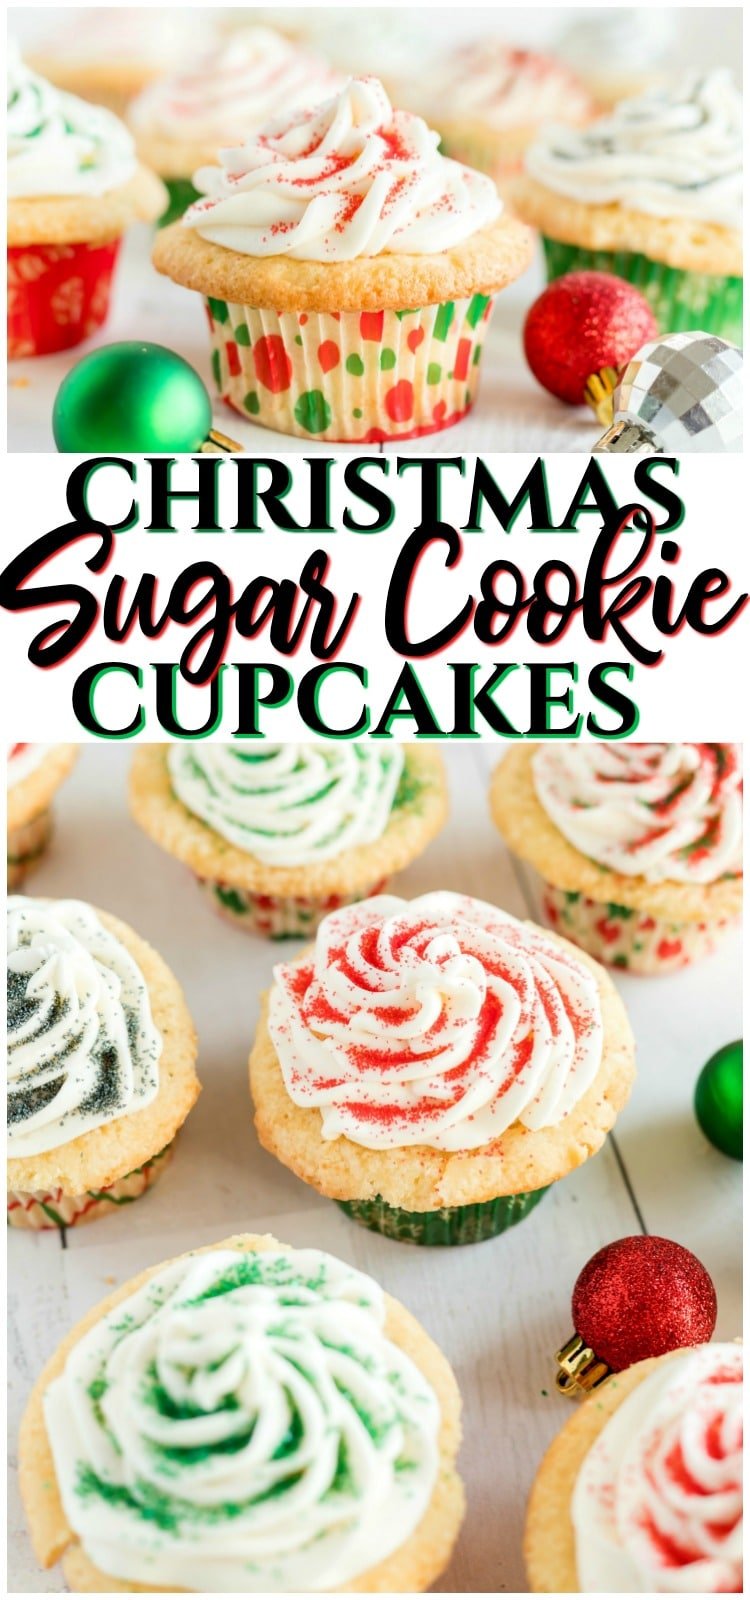 Sugar Cookie Cupcakes are cupcakes that taste just like sugar cookies! The best flavors of two incredible desserts combine in these soft and sweet vanilla frosted cupcakes. #sugarcookies #cupcakes #baking #dessert #Christmas #holidays #dessert #recipe from BUTTER WITH A SIDE OF BREAD